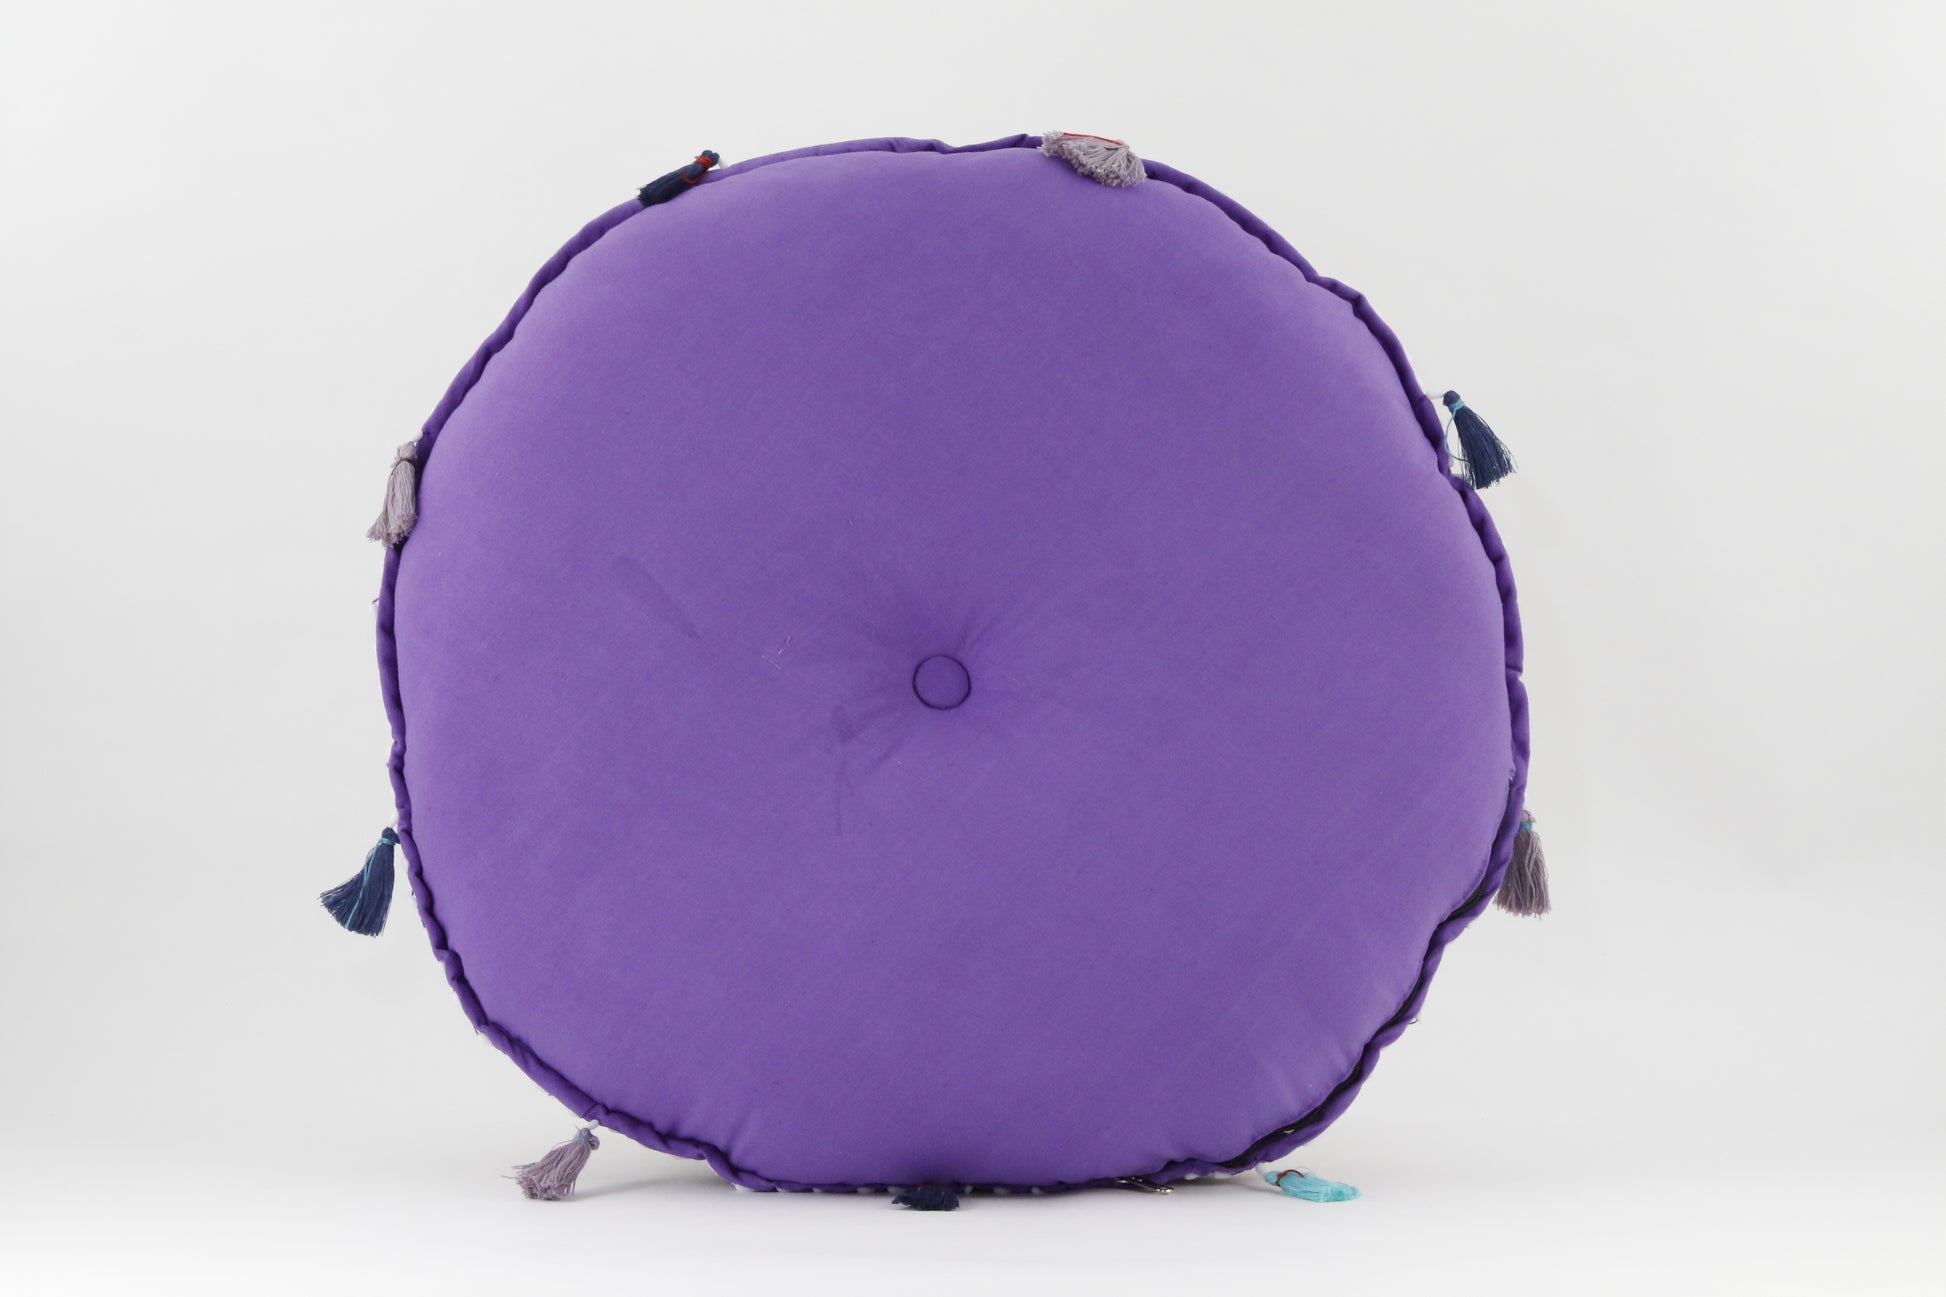 MEDITATION CUSHION PURPLE EMBROIDERED ROUND BACK VIEW